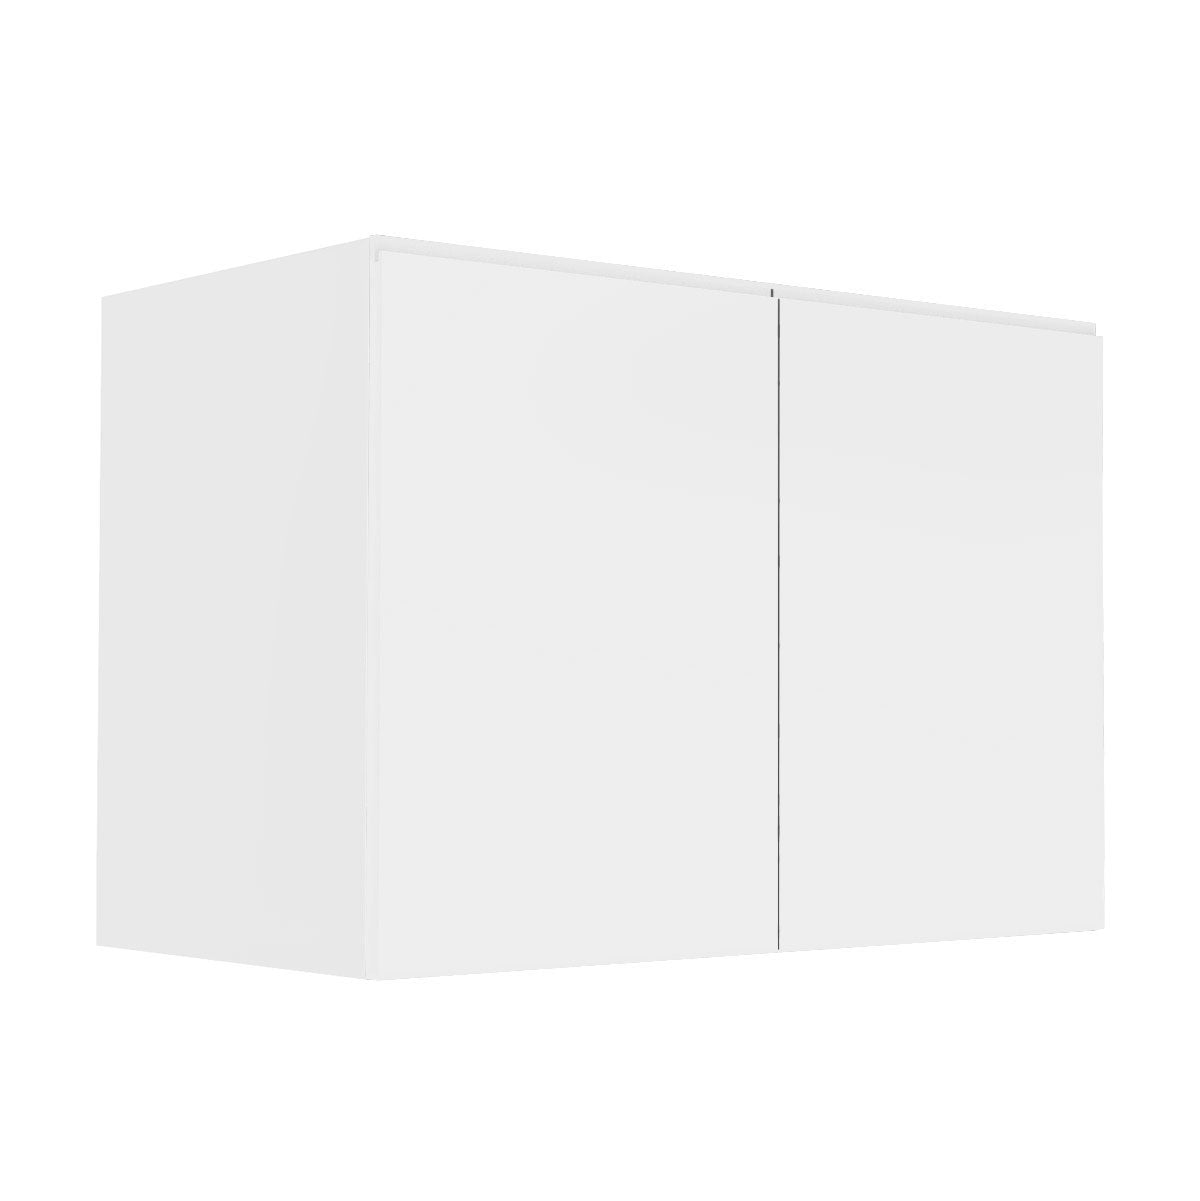 Base Cabinet - RTA - Lacquer White - Full Height Kitchen Cabinet - Double Door | 42"W x 34.5"H x 23.8"D